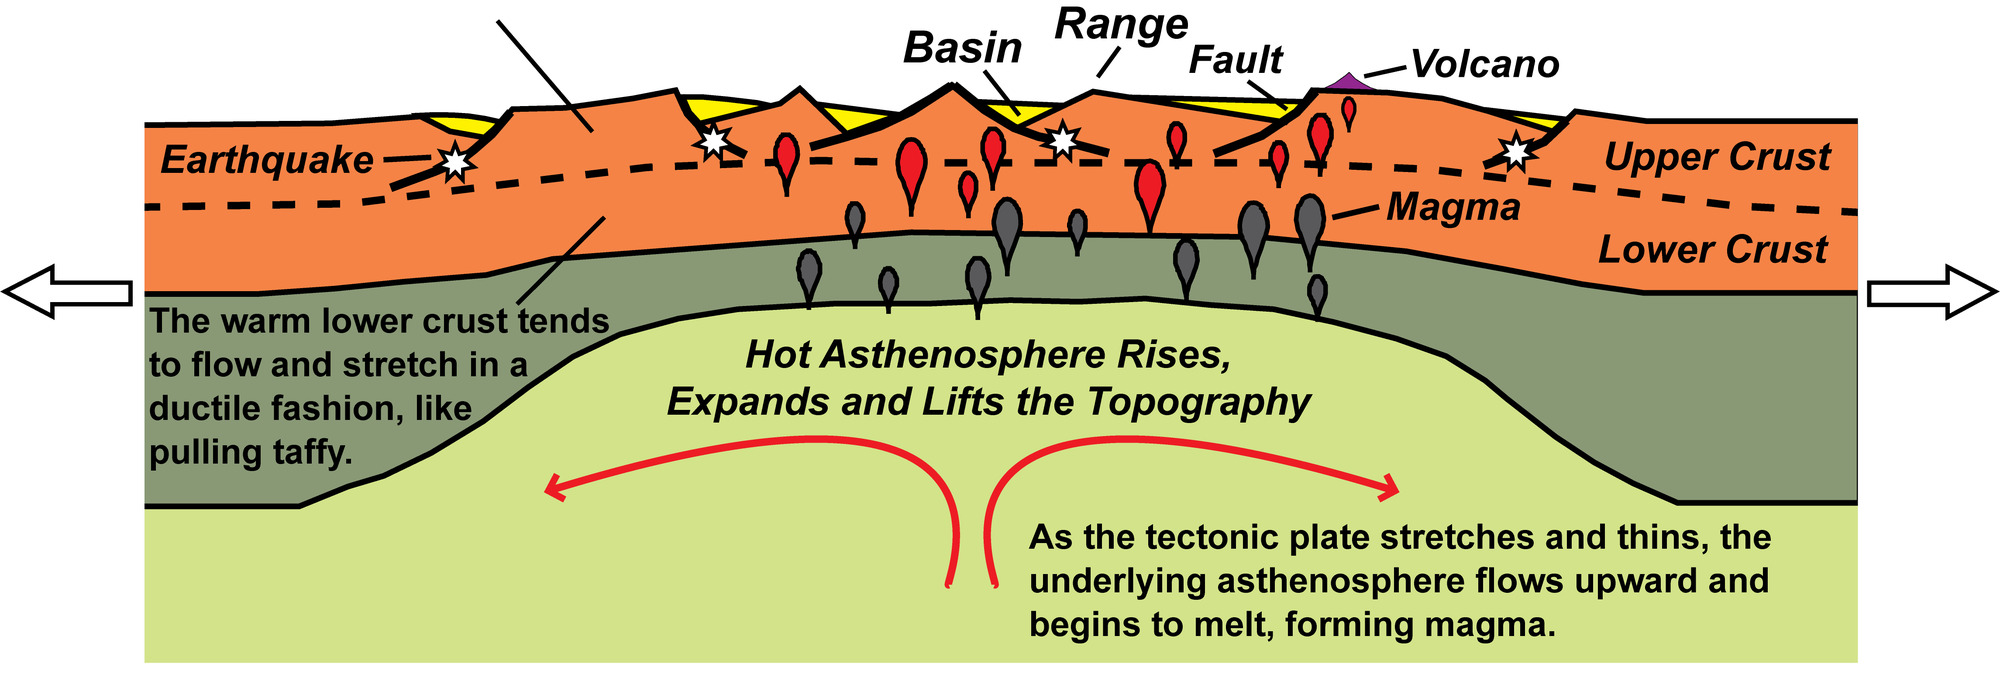 illustration of upper layers of the earth where they are being spread and thinned—under going continental rifting.